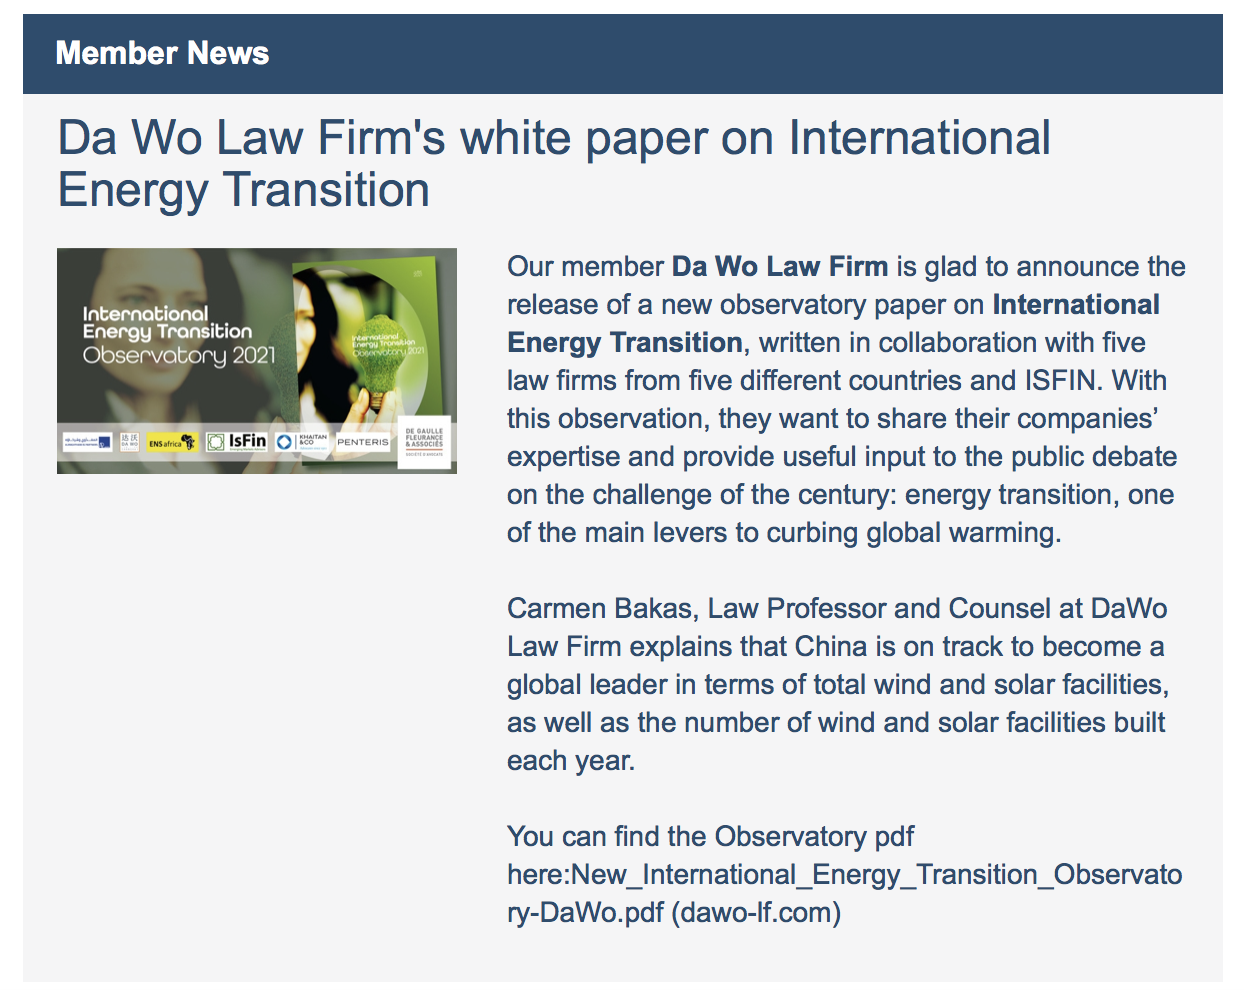 Da Wo Law Firm's white paper on International Energy Transition